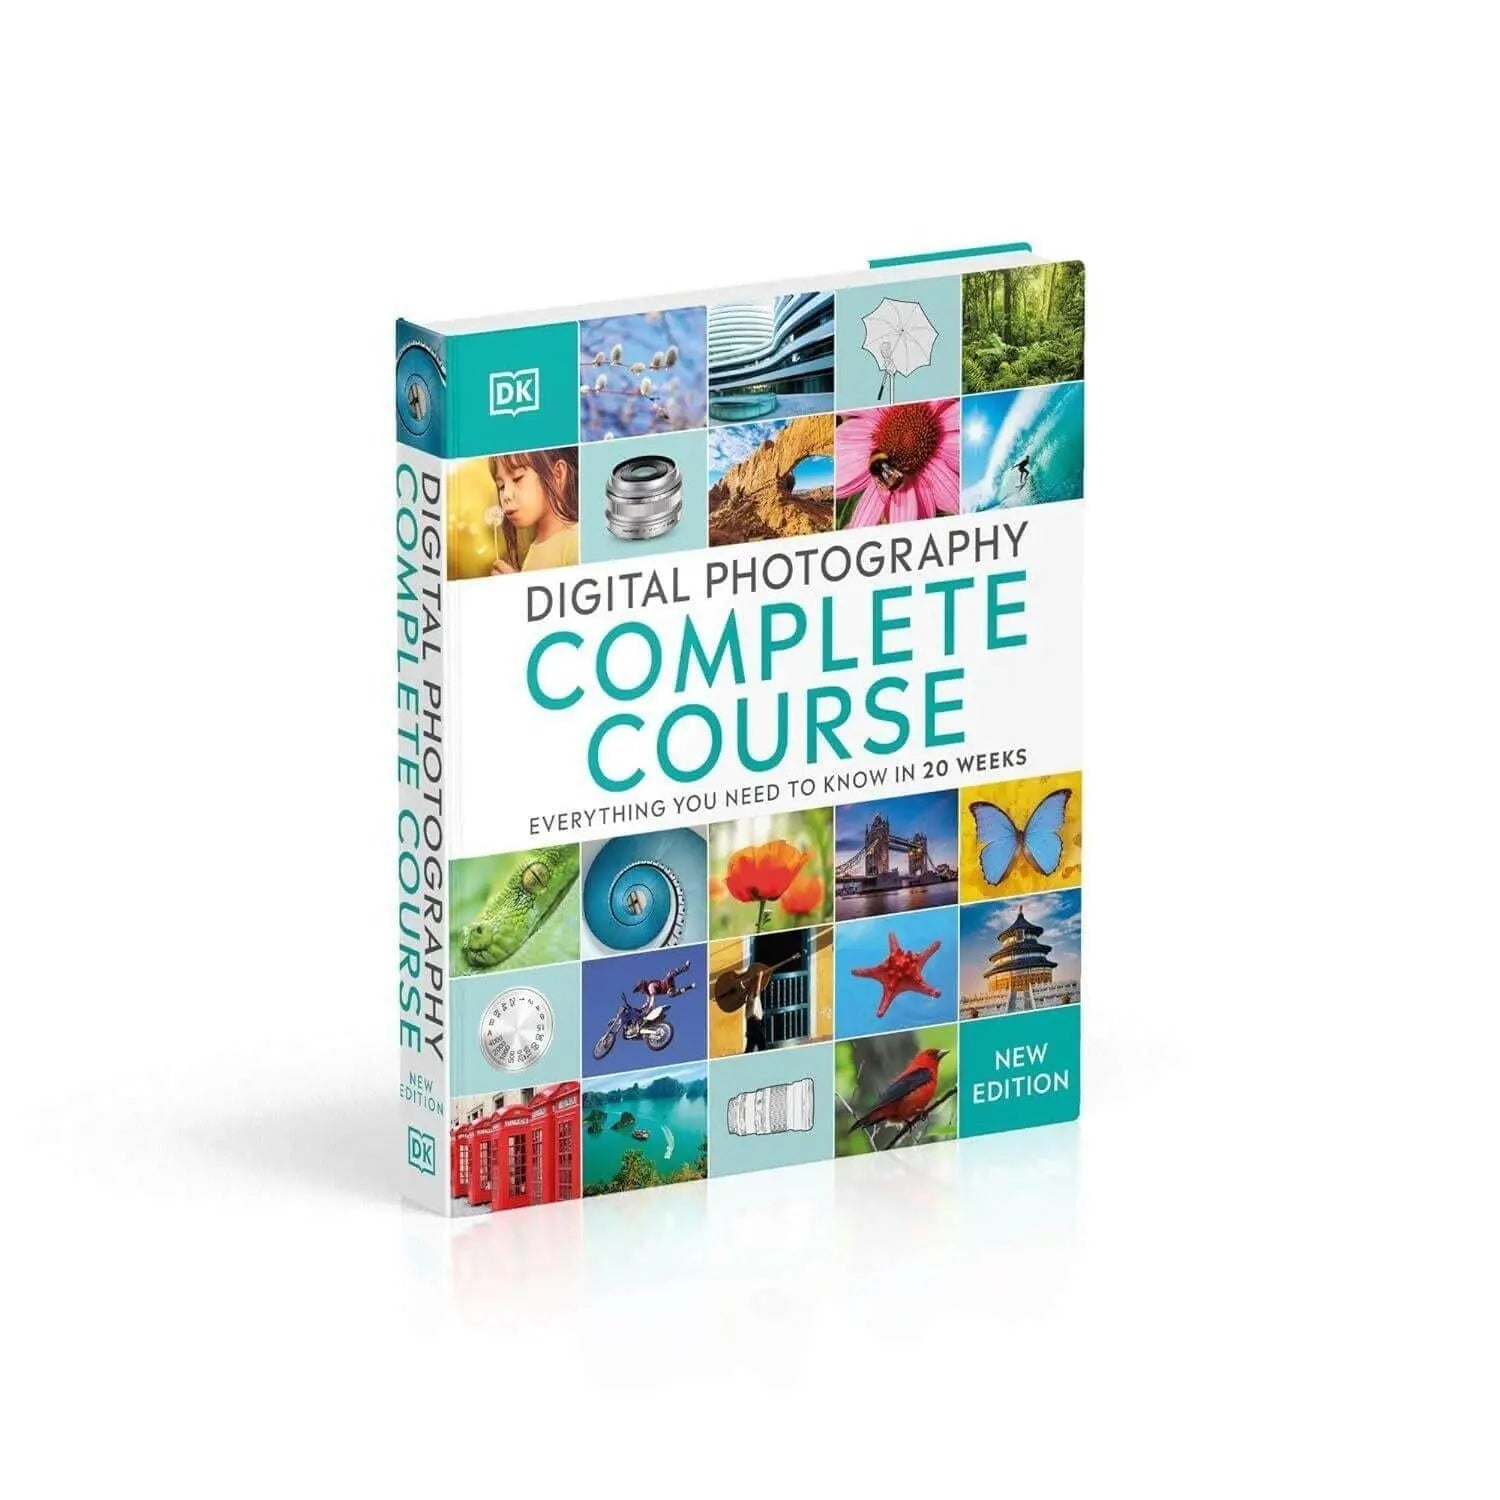 Digital Photography Complete Course: Everything You Need to Know in 20 Weeks Hardcover – 7 January 2021 by DK (Author)